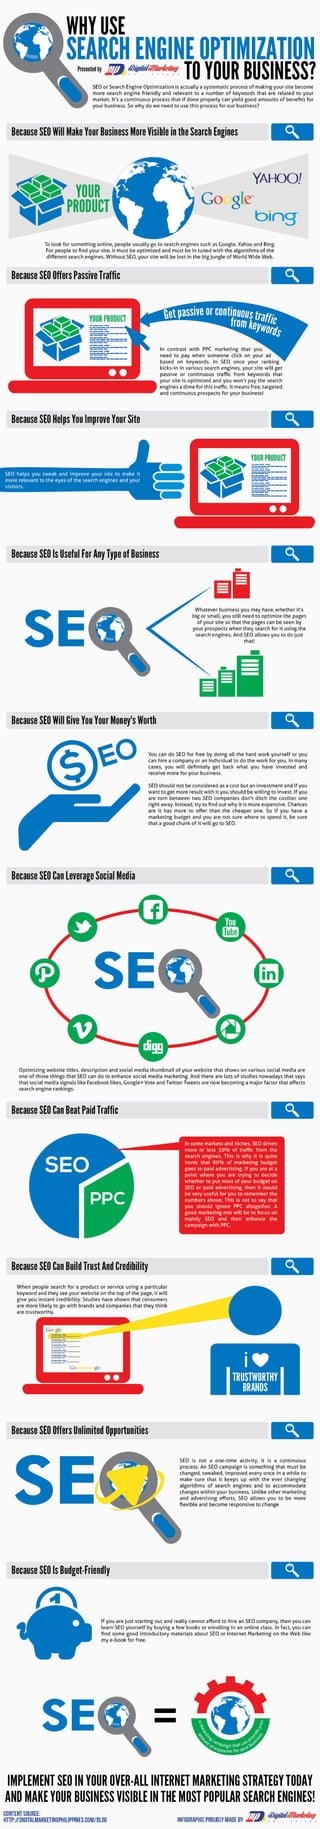 Why Use SEO to Your Business?